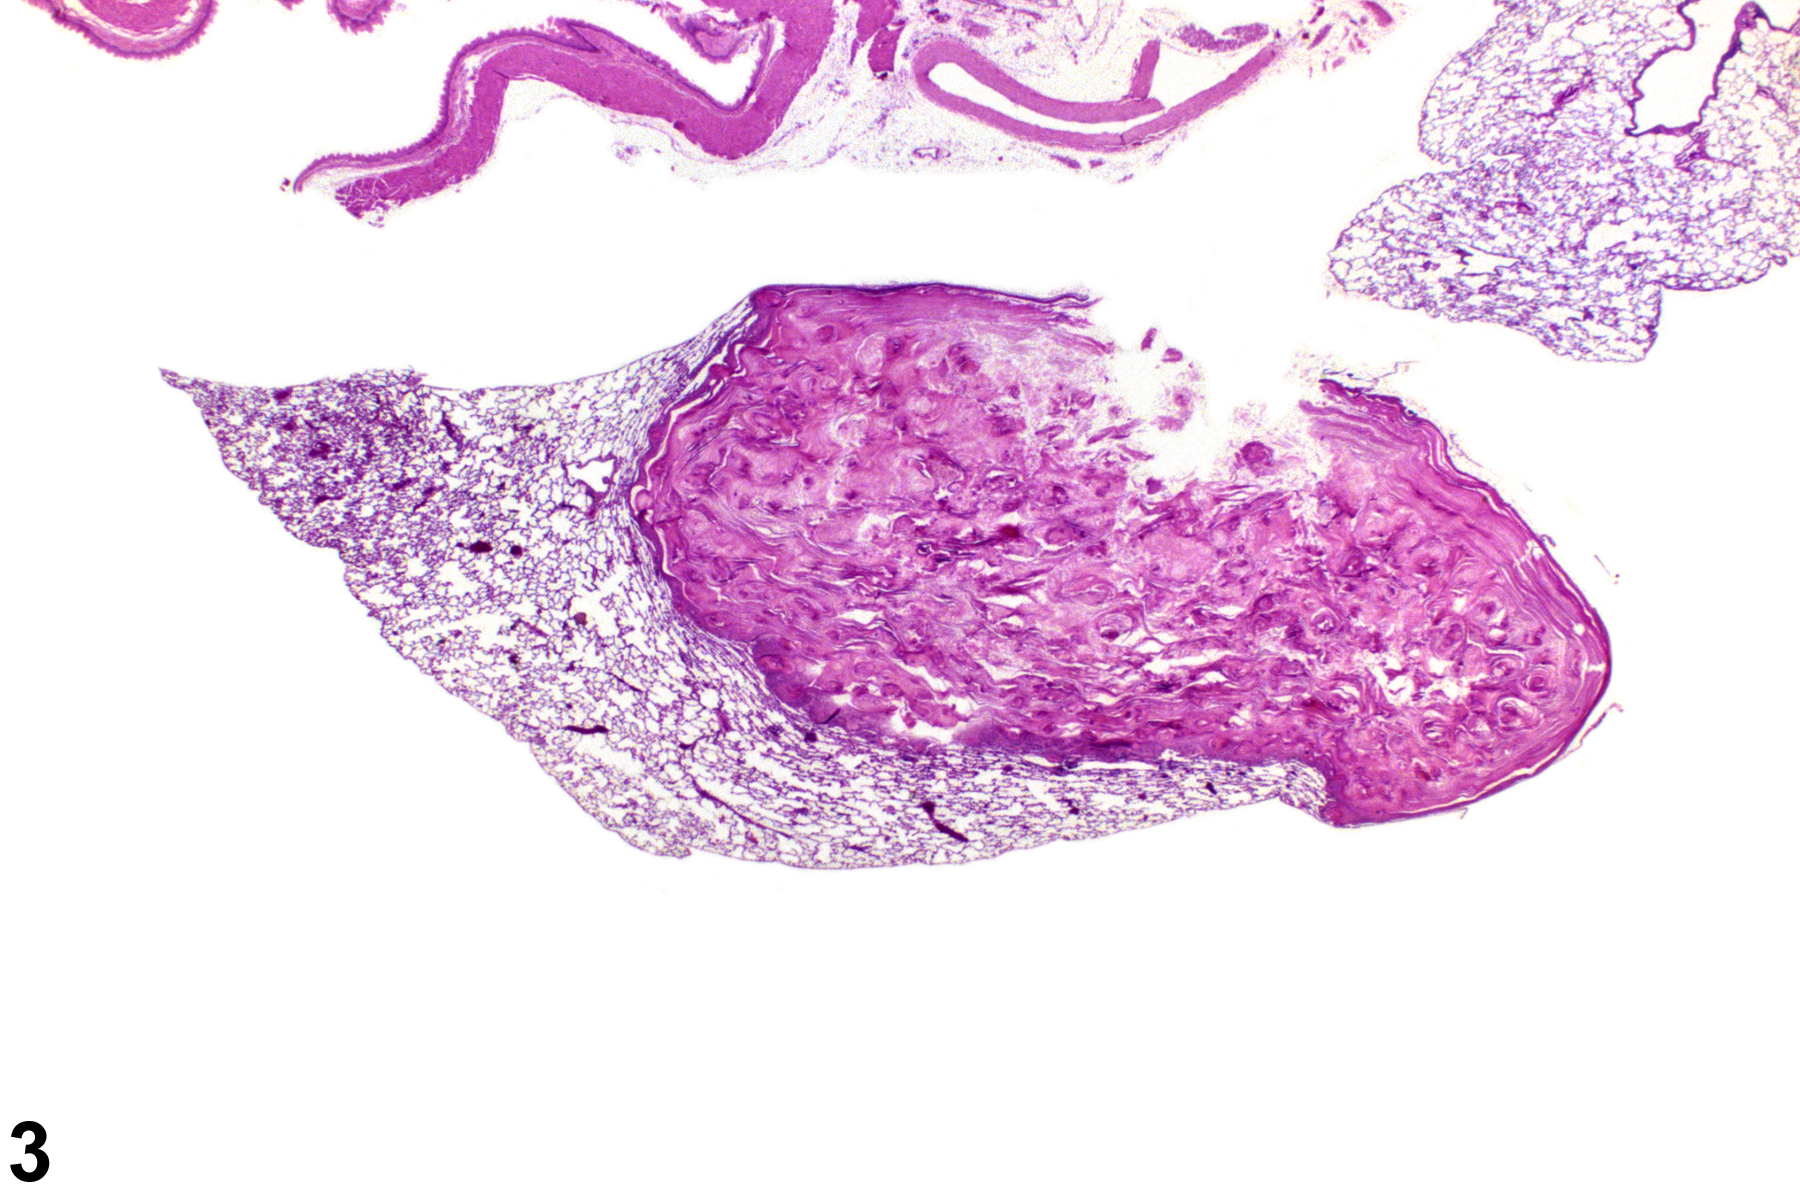 Image of keratinizing cyst in the lung from a female F344/N rat in a chronic study